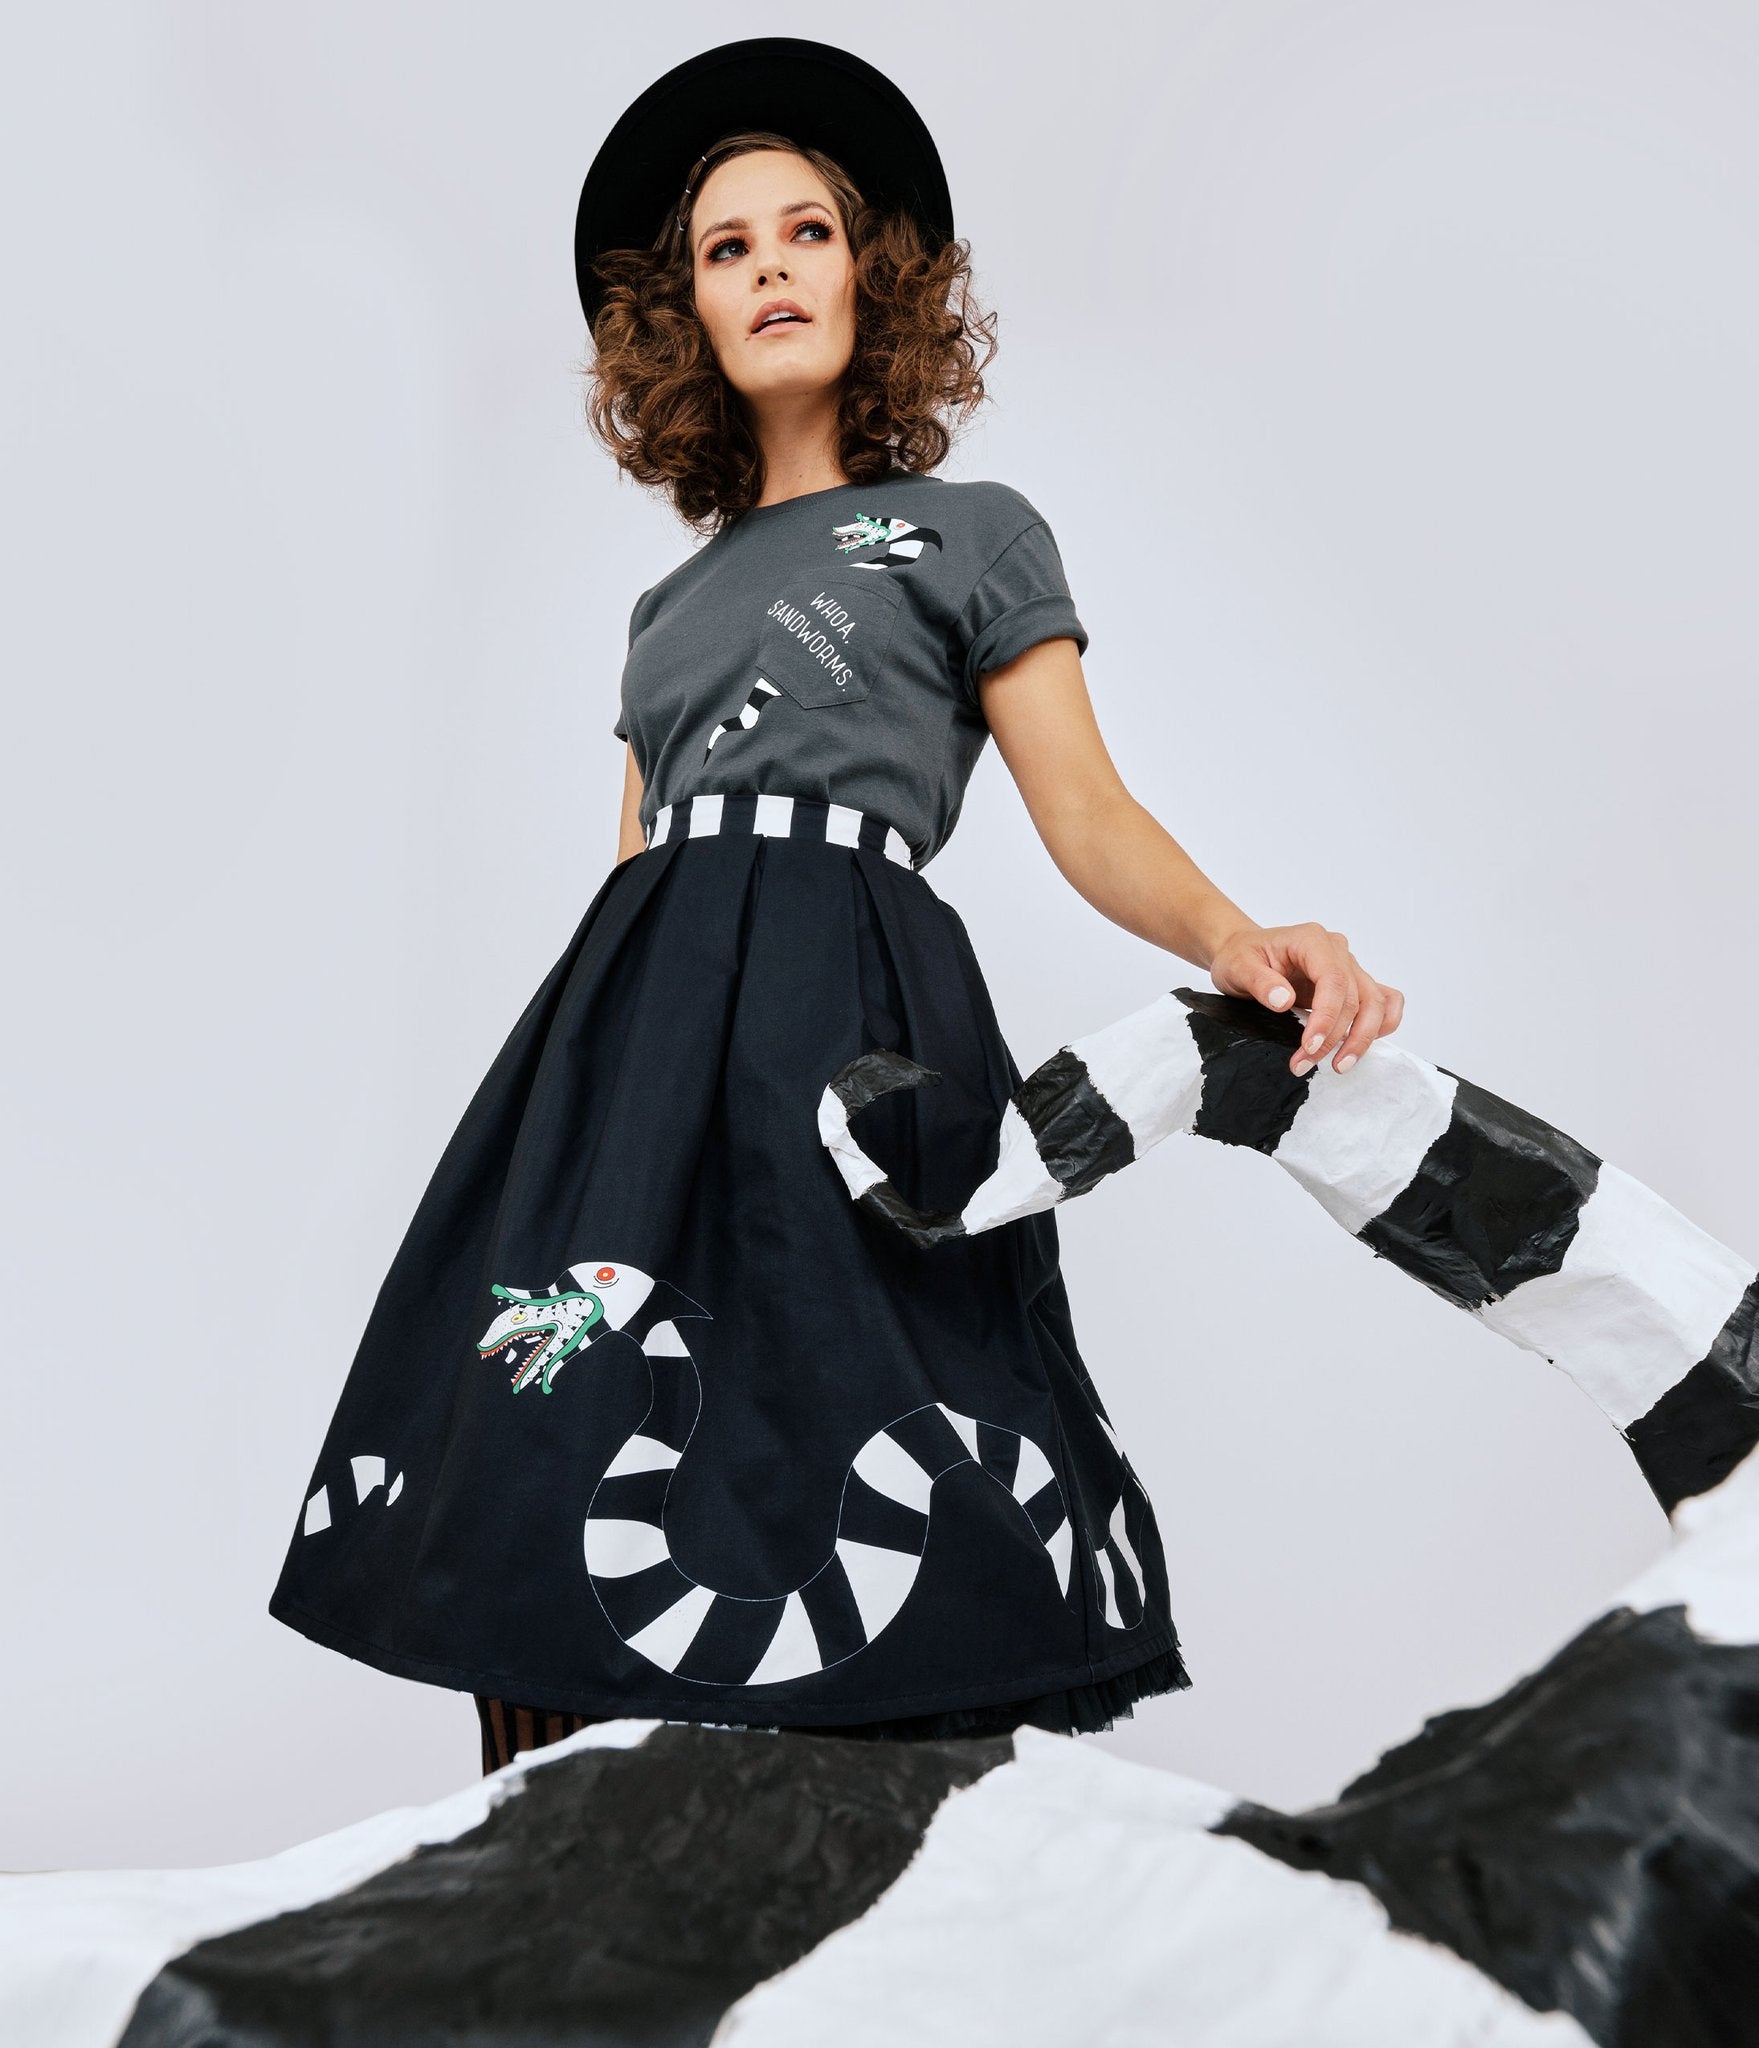 This is a Beetlejuice vintage pinup Sandworm swing skirt from Unique Vintage, that is black with a striped worm and the model is wearing a grey shirt and black hat.